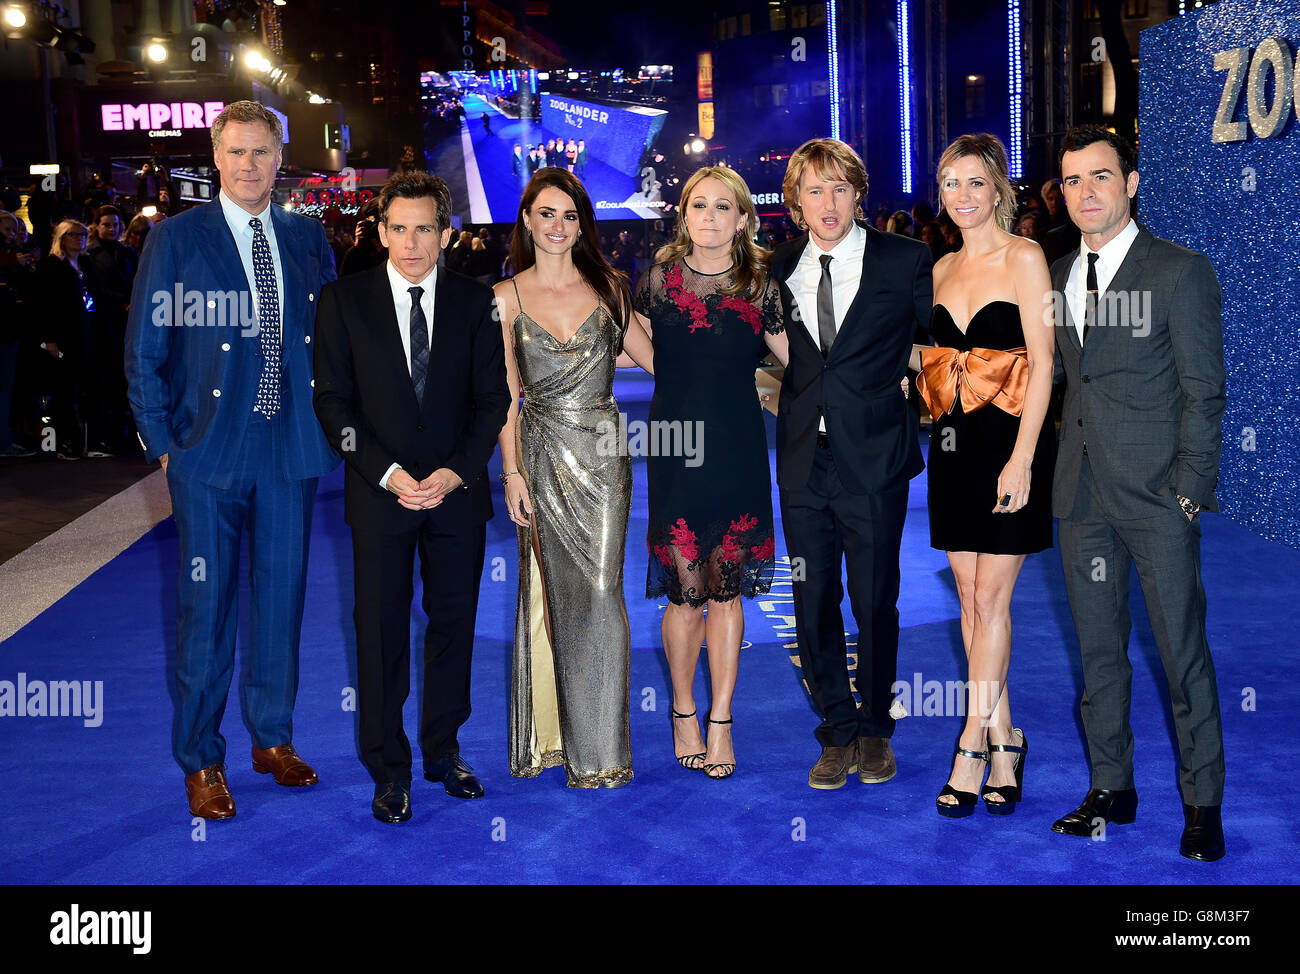 Will Ferrell, Ben Stiller, Penelope Cruz, Christine Taylor, Owen Wilson, Kristen Wiig and Justin Theroux attending the Zoolander 2 UK premiere, held at the Empire, Leicester Square, London. PRESS ASSOCIATION Photo. Picture date: Thursday February 4, 2016. Photo credit should read: Ian West/PA Wire Stock Photo